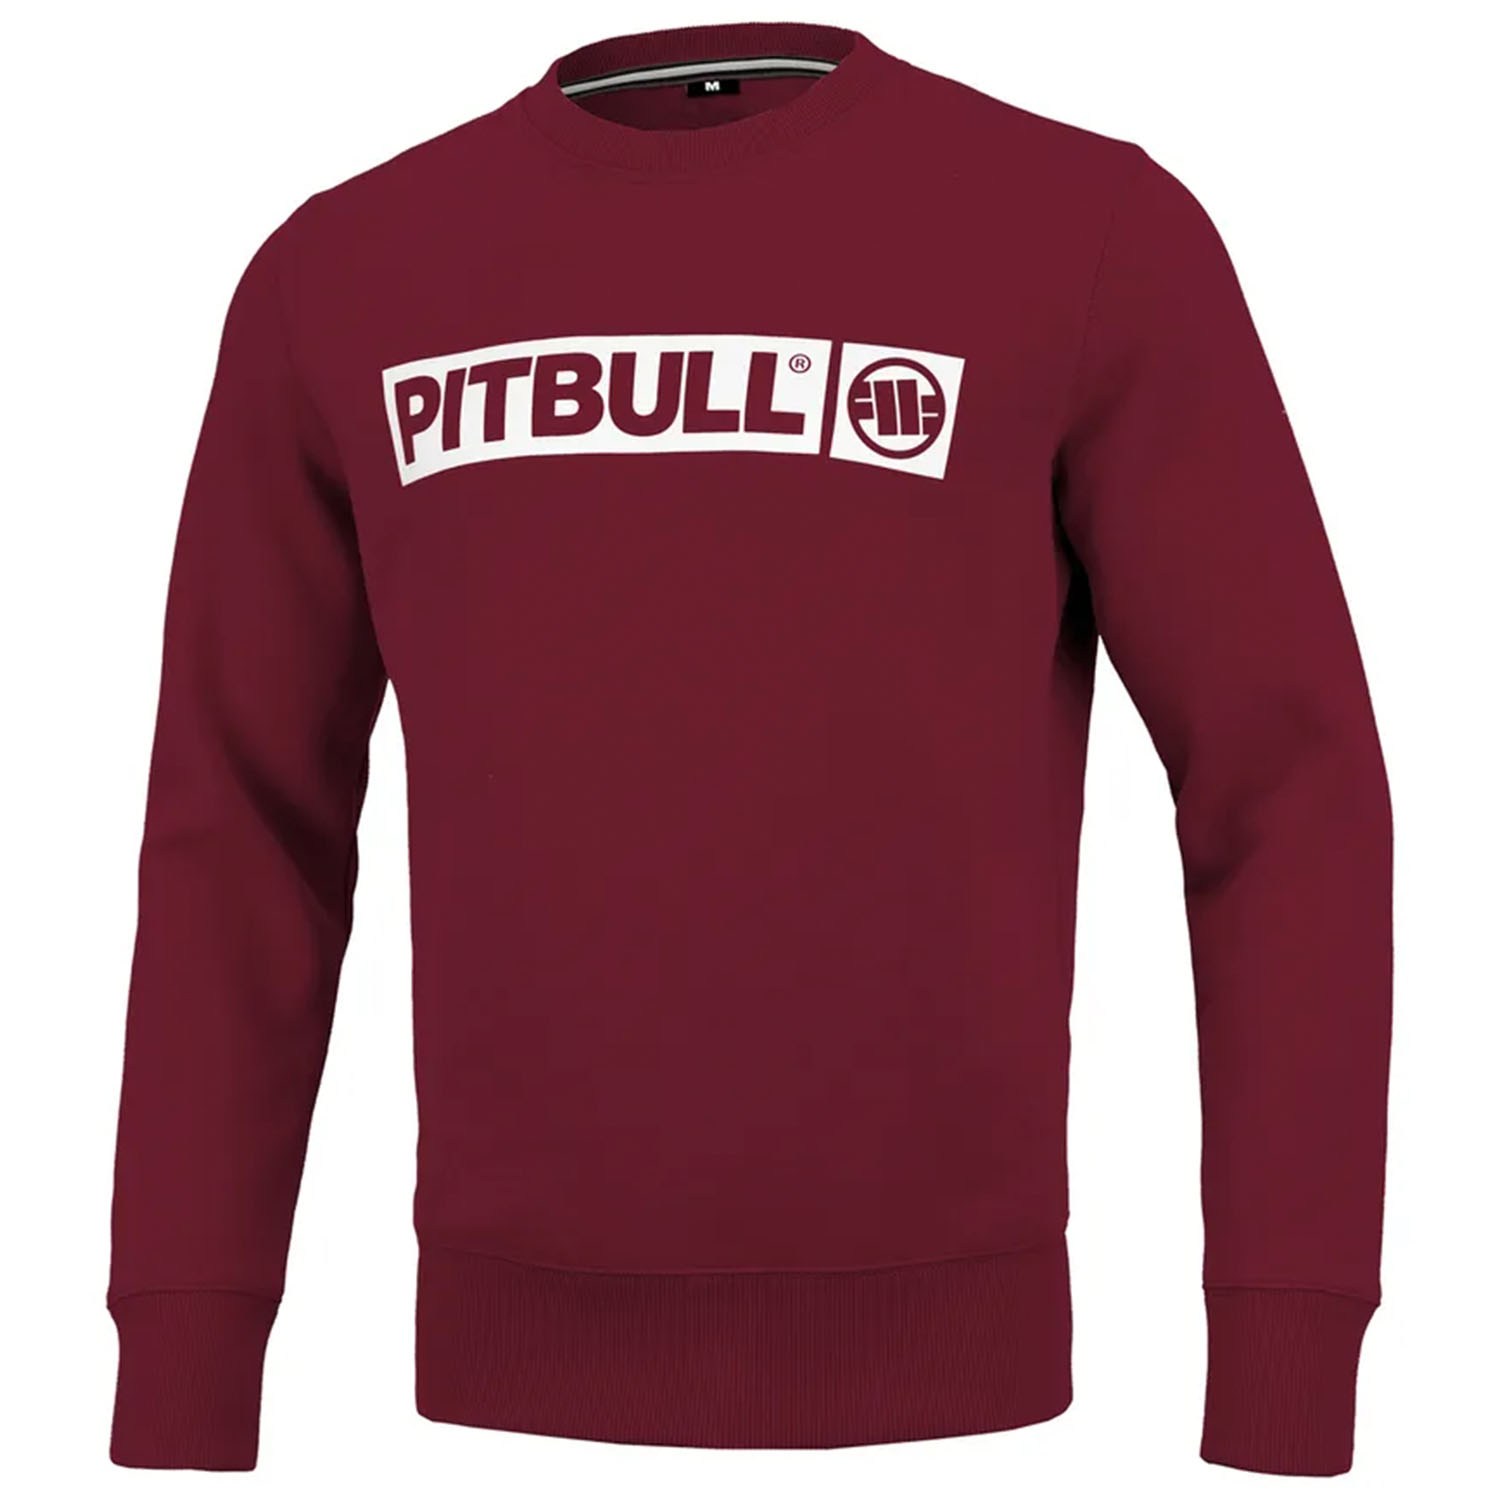 Pit Bull West Coast Pullover, Terry Hilltop, weinrot